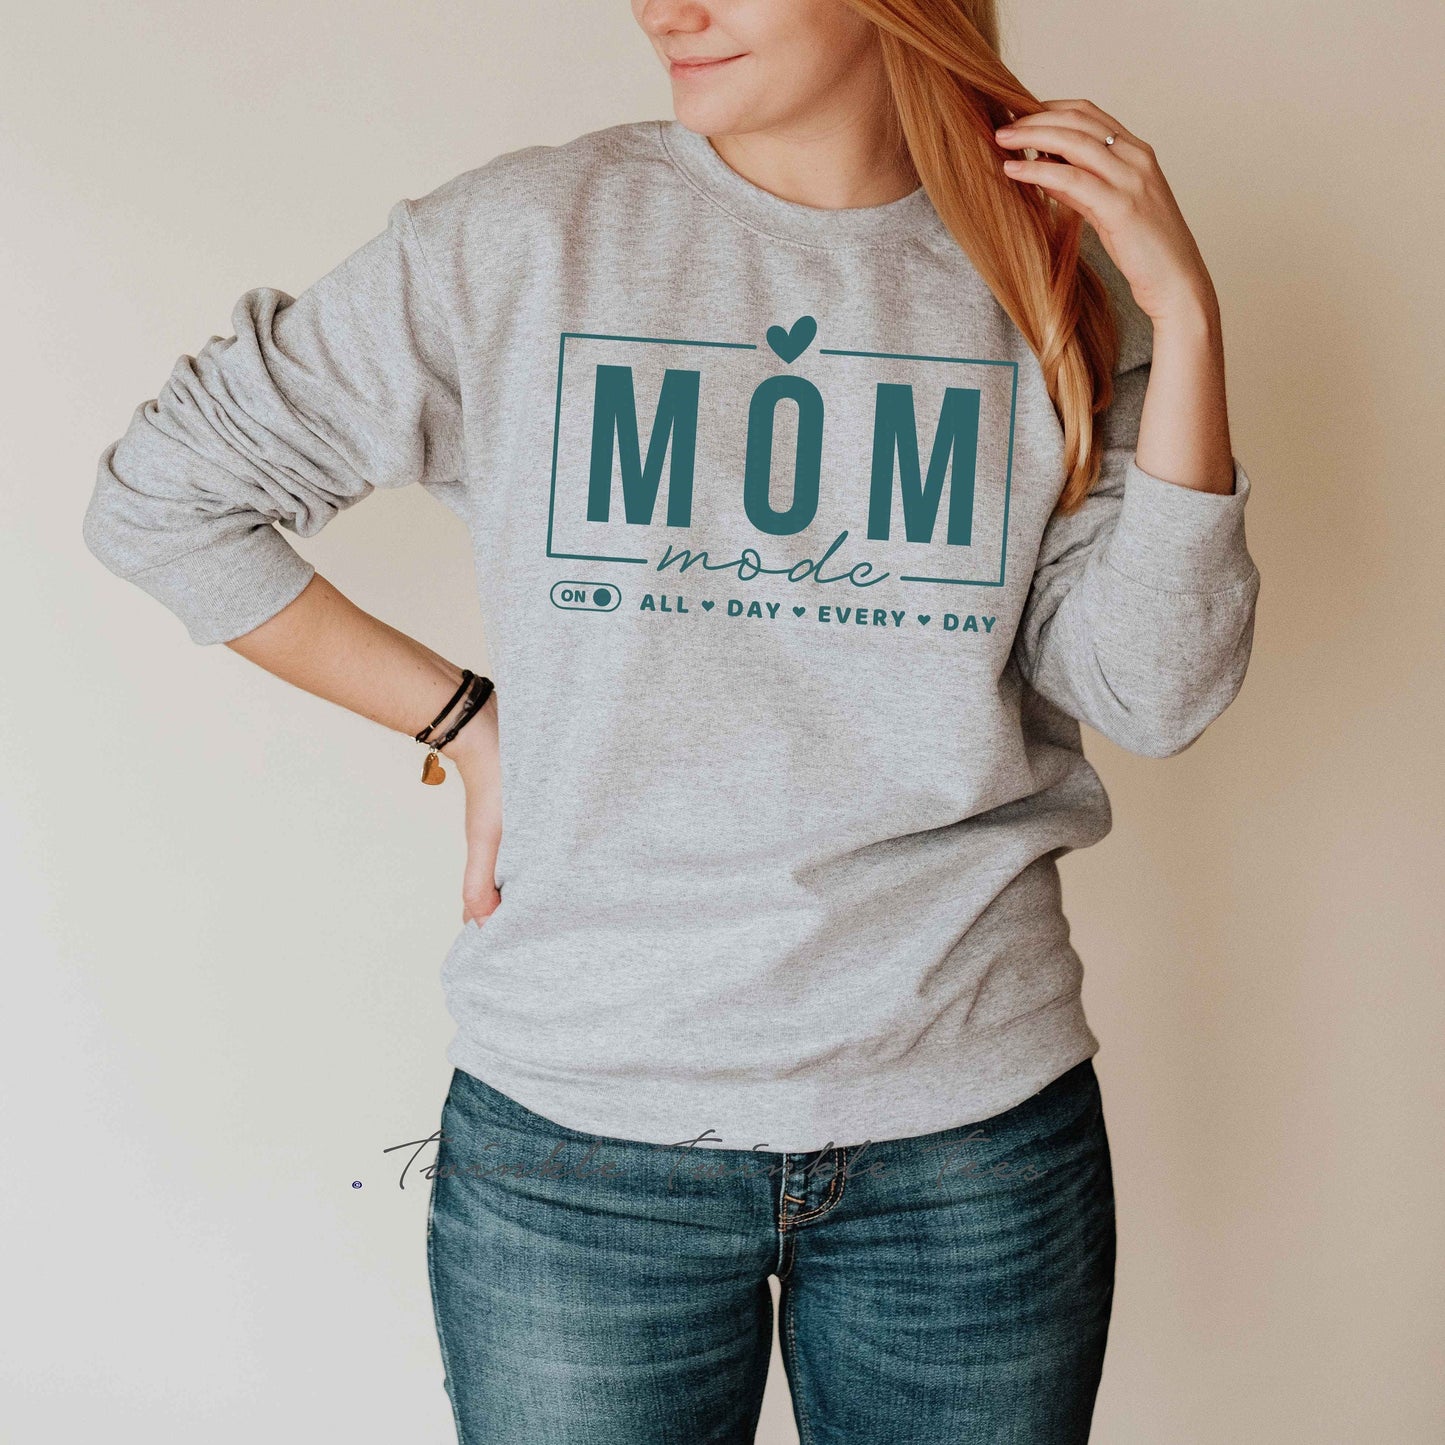 Mom Mode On All Day Every Day fleece sweatshirt - funny sweatshirt - shirt for mom - mother's day sweatshirt